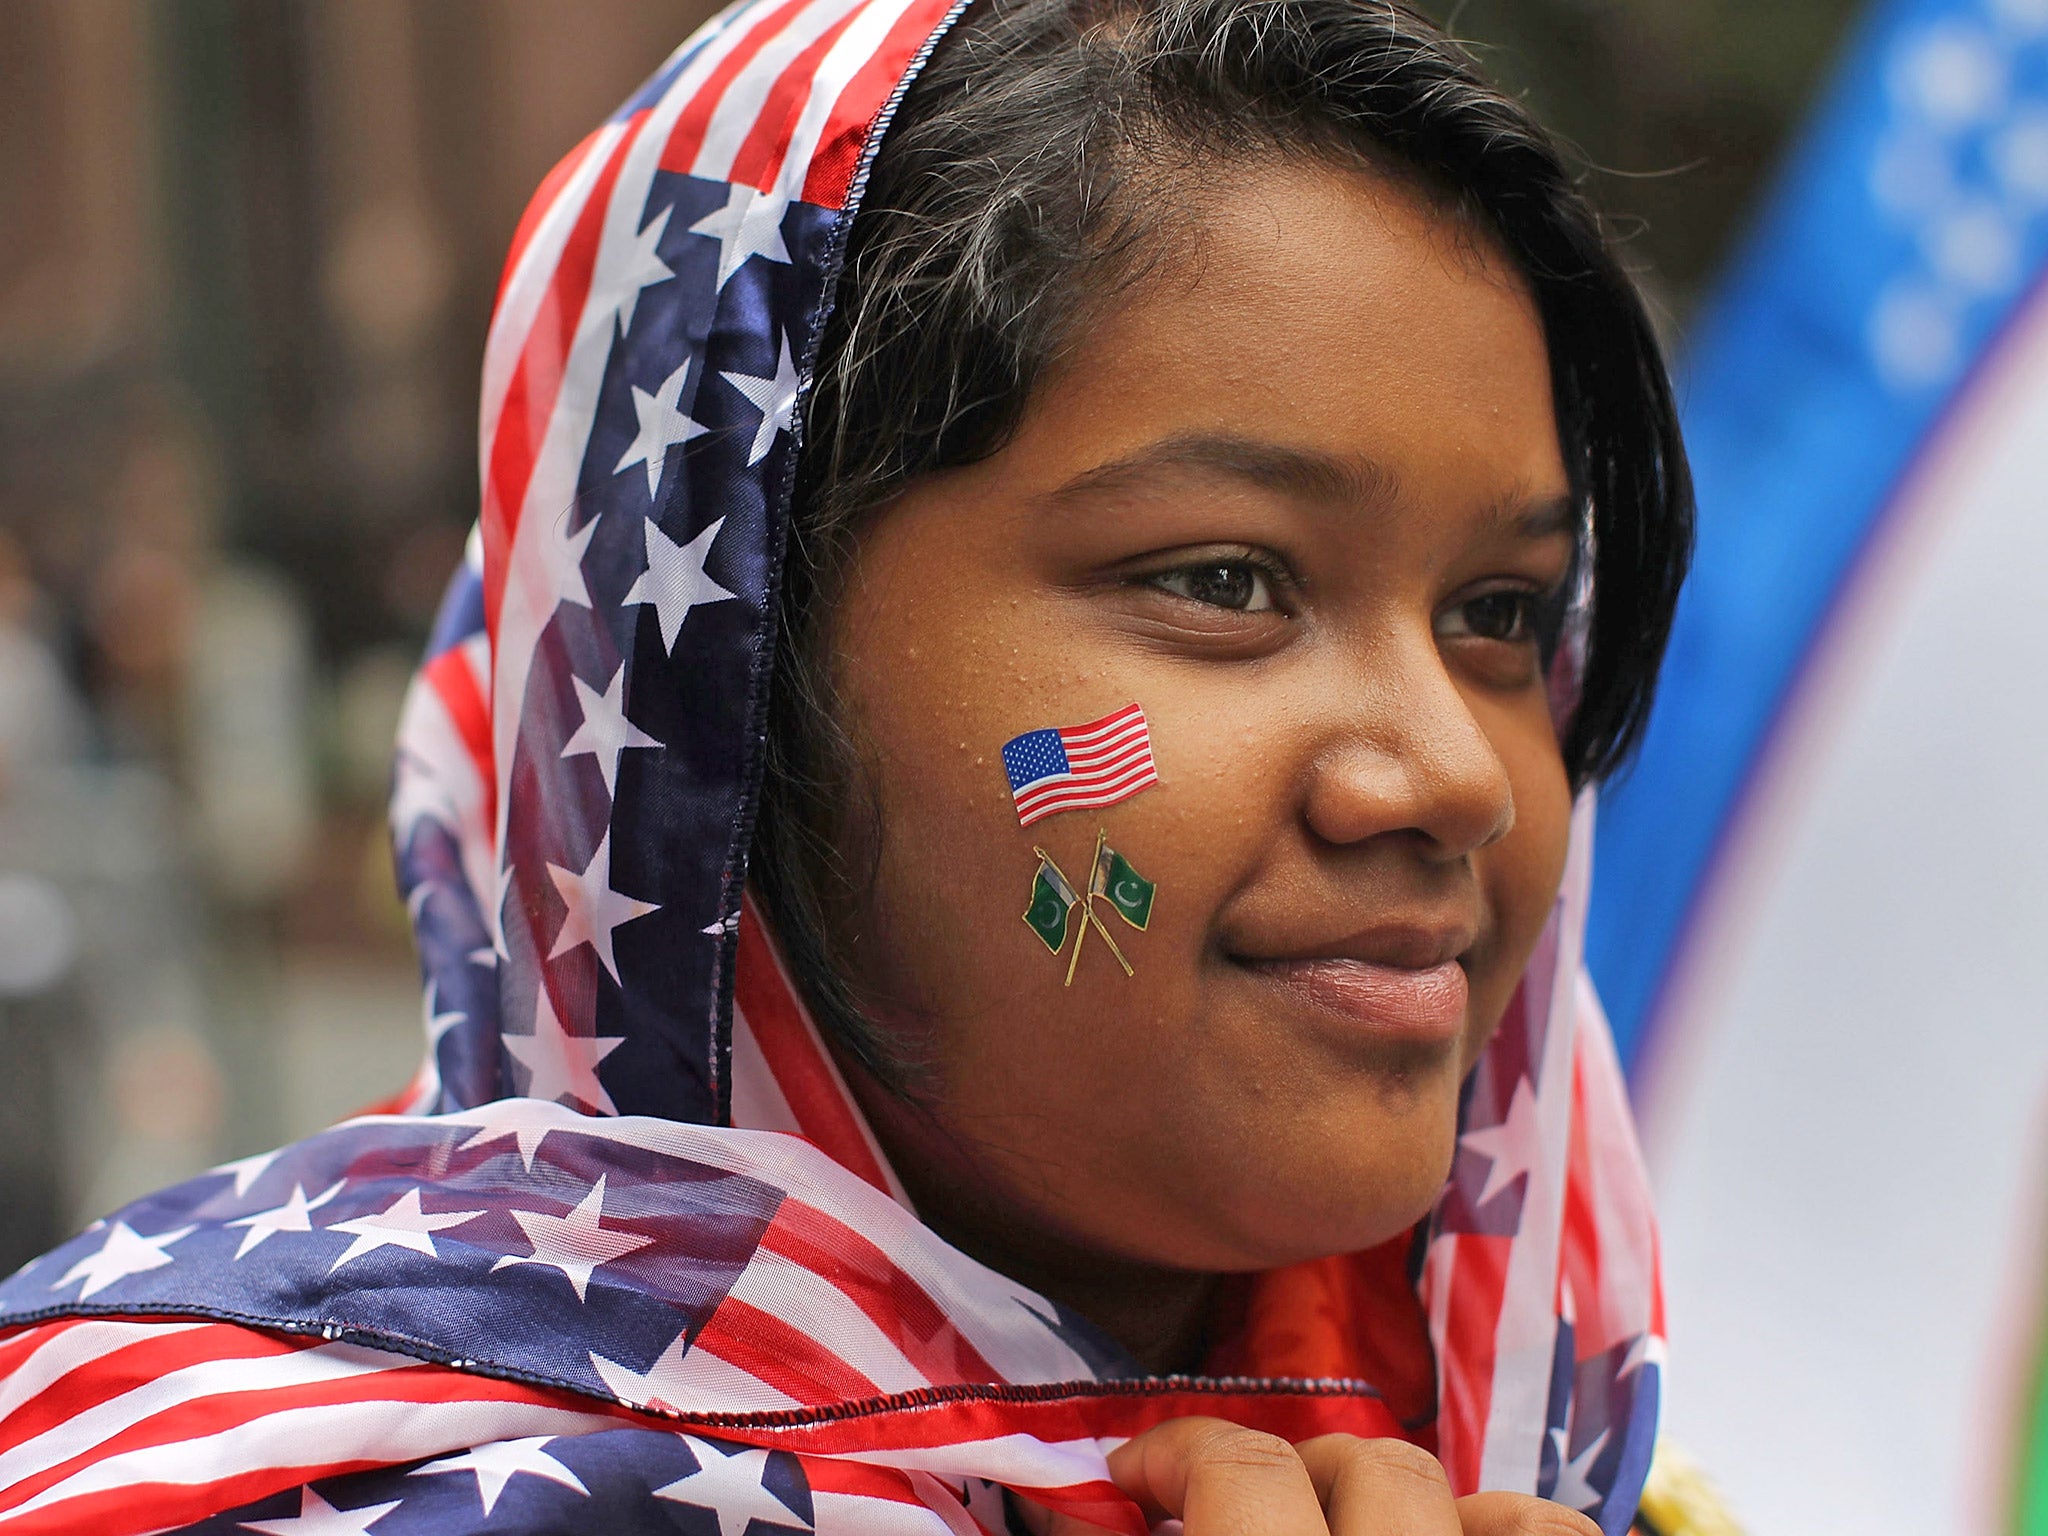 More than nine in 10 US Muslims still feel proud to be American